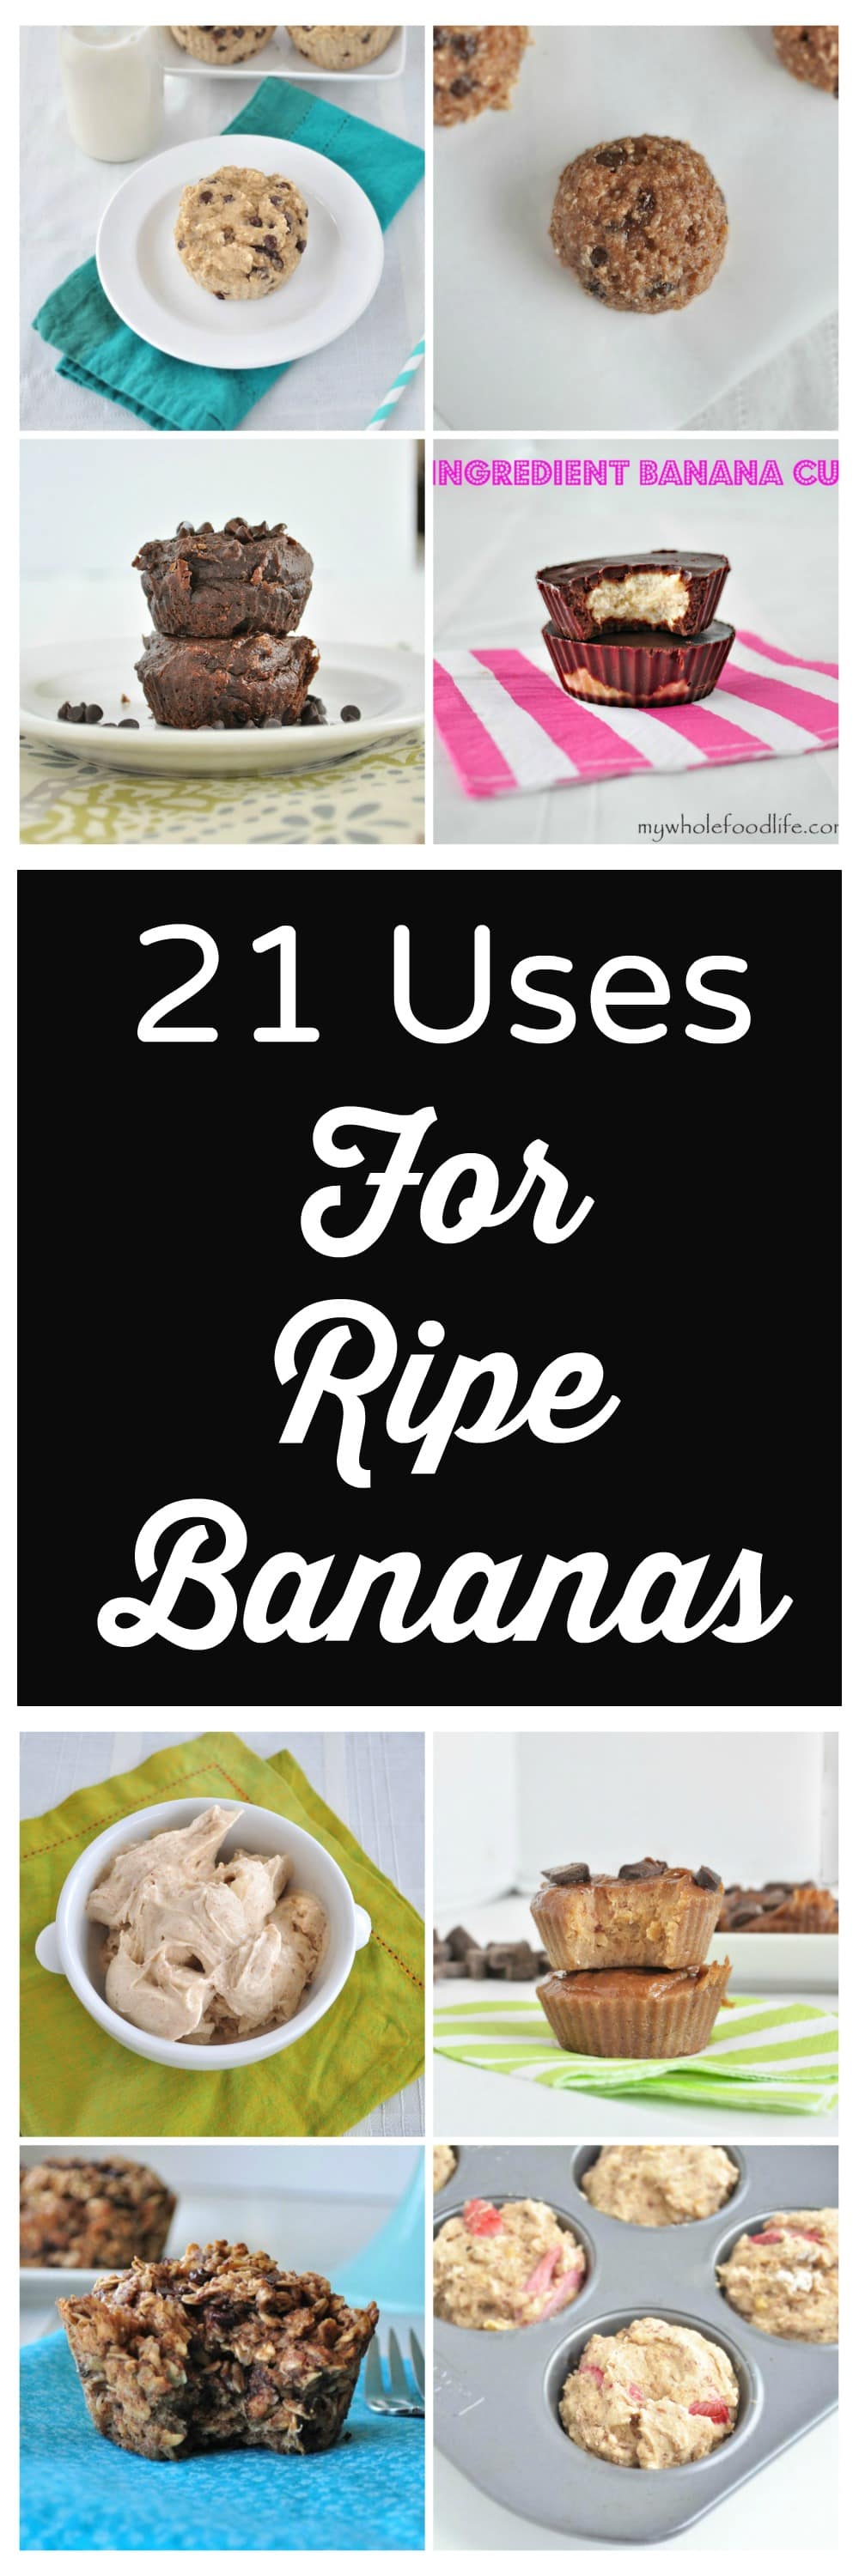 Uses for Ripe Bananas collage